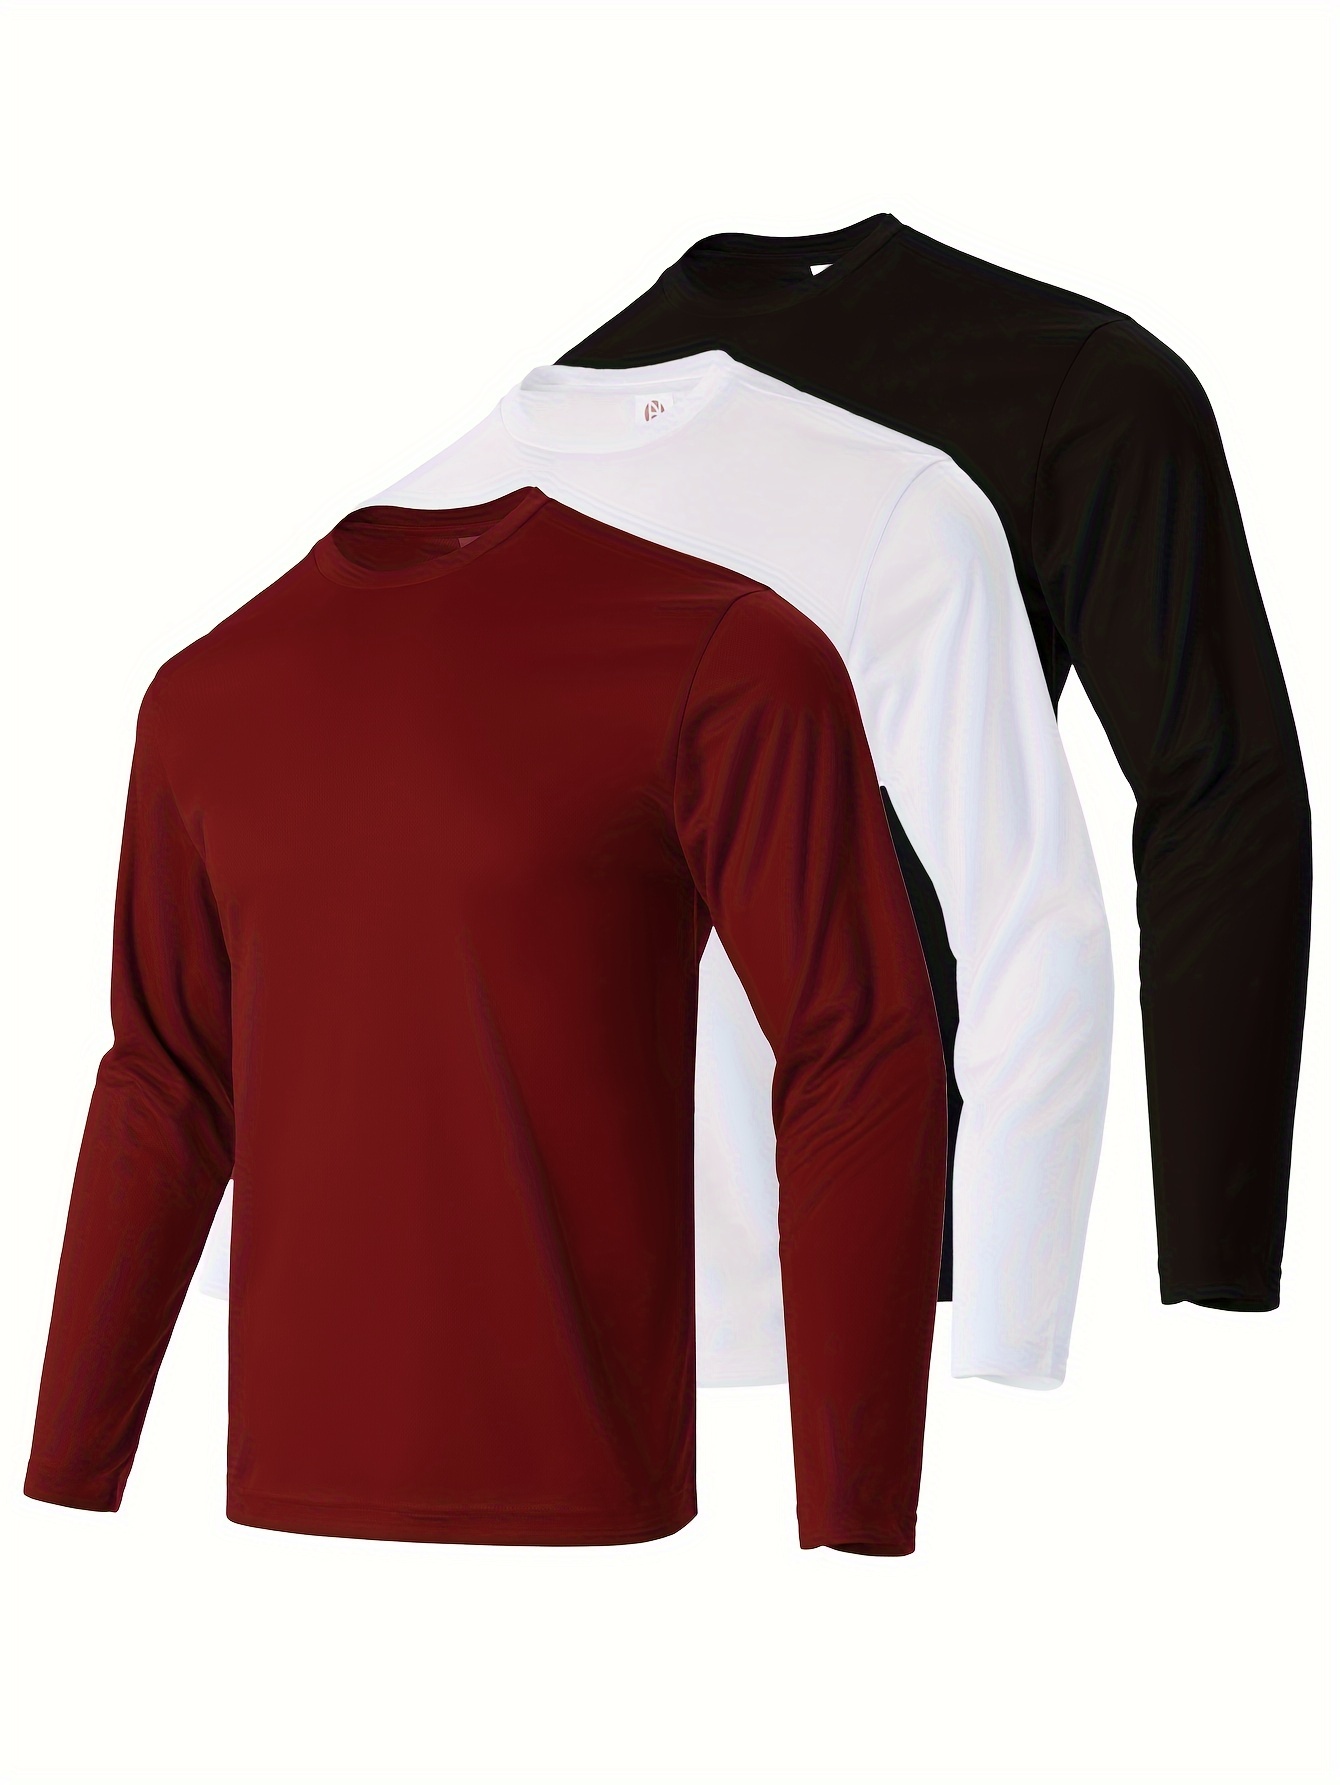 Pack of 4] Raglan 2 colors button Full sleeves T shirts for men and women  Random Colors